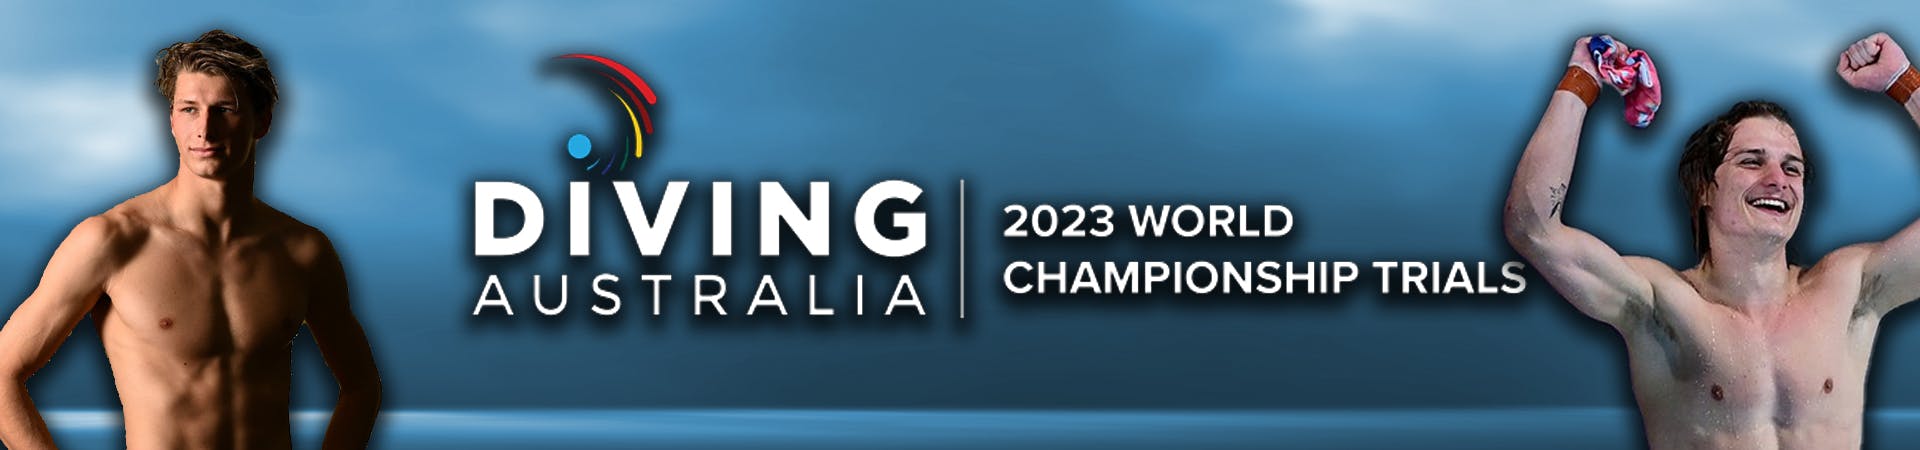 2023 World Championship Trials Cover Image